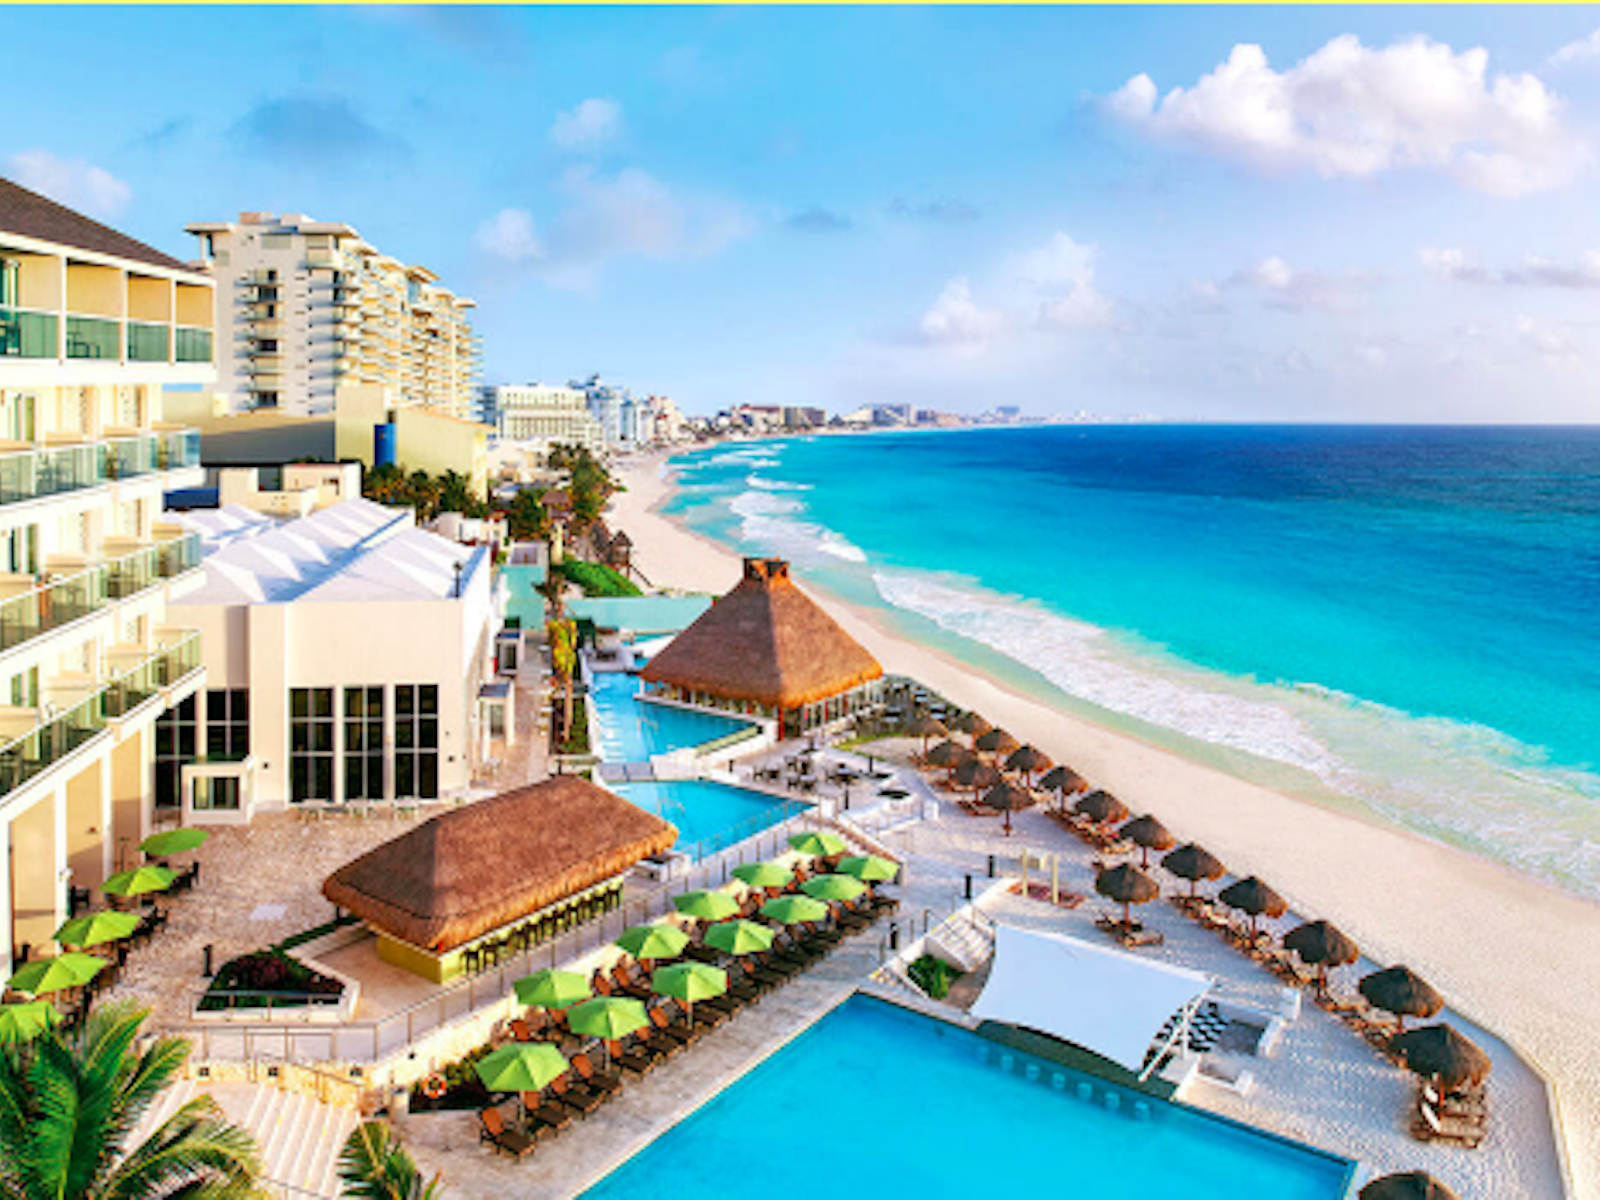 Westin Cancun Timeshare Offer: $249 + 15k Points or $75 Resort Credit